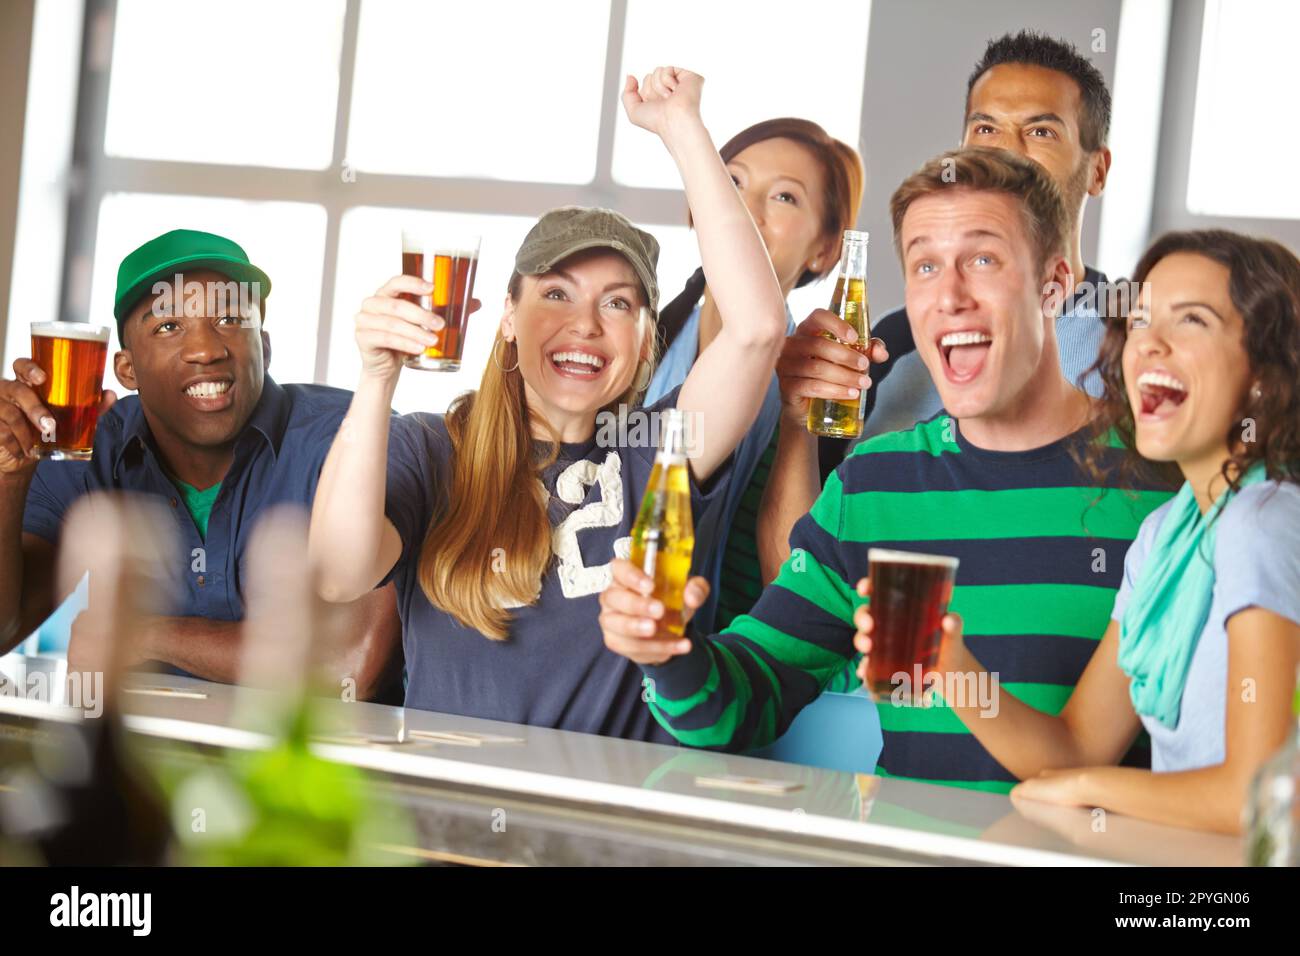 Fans to the end. A group of excited friends cheering on their favourite team at the bar. Stock Photo